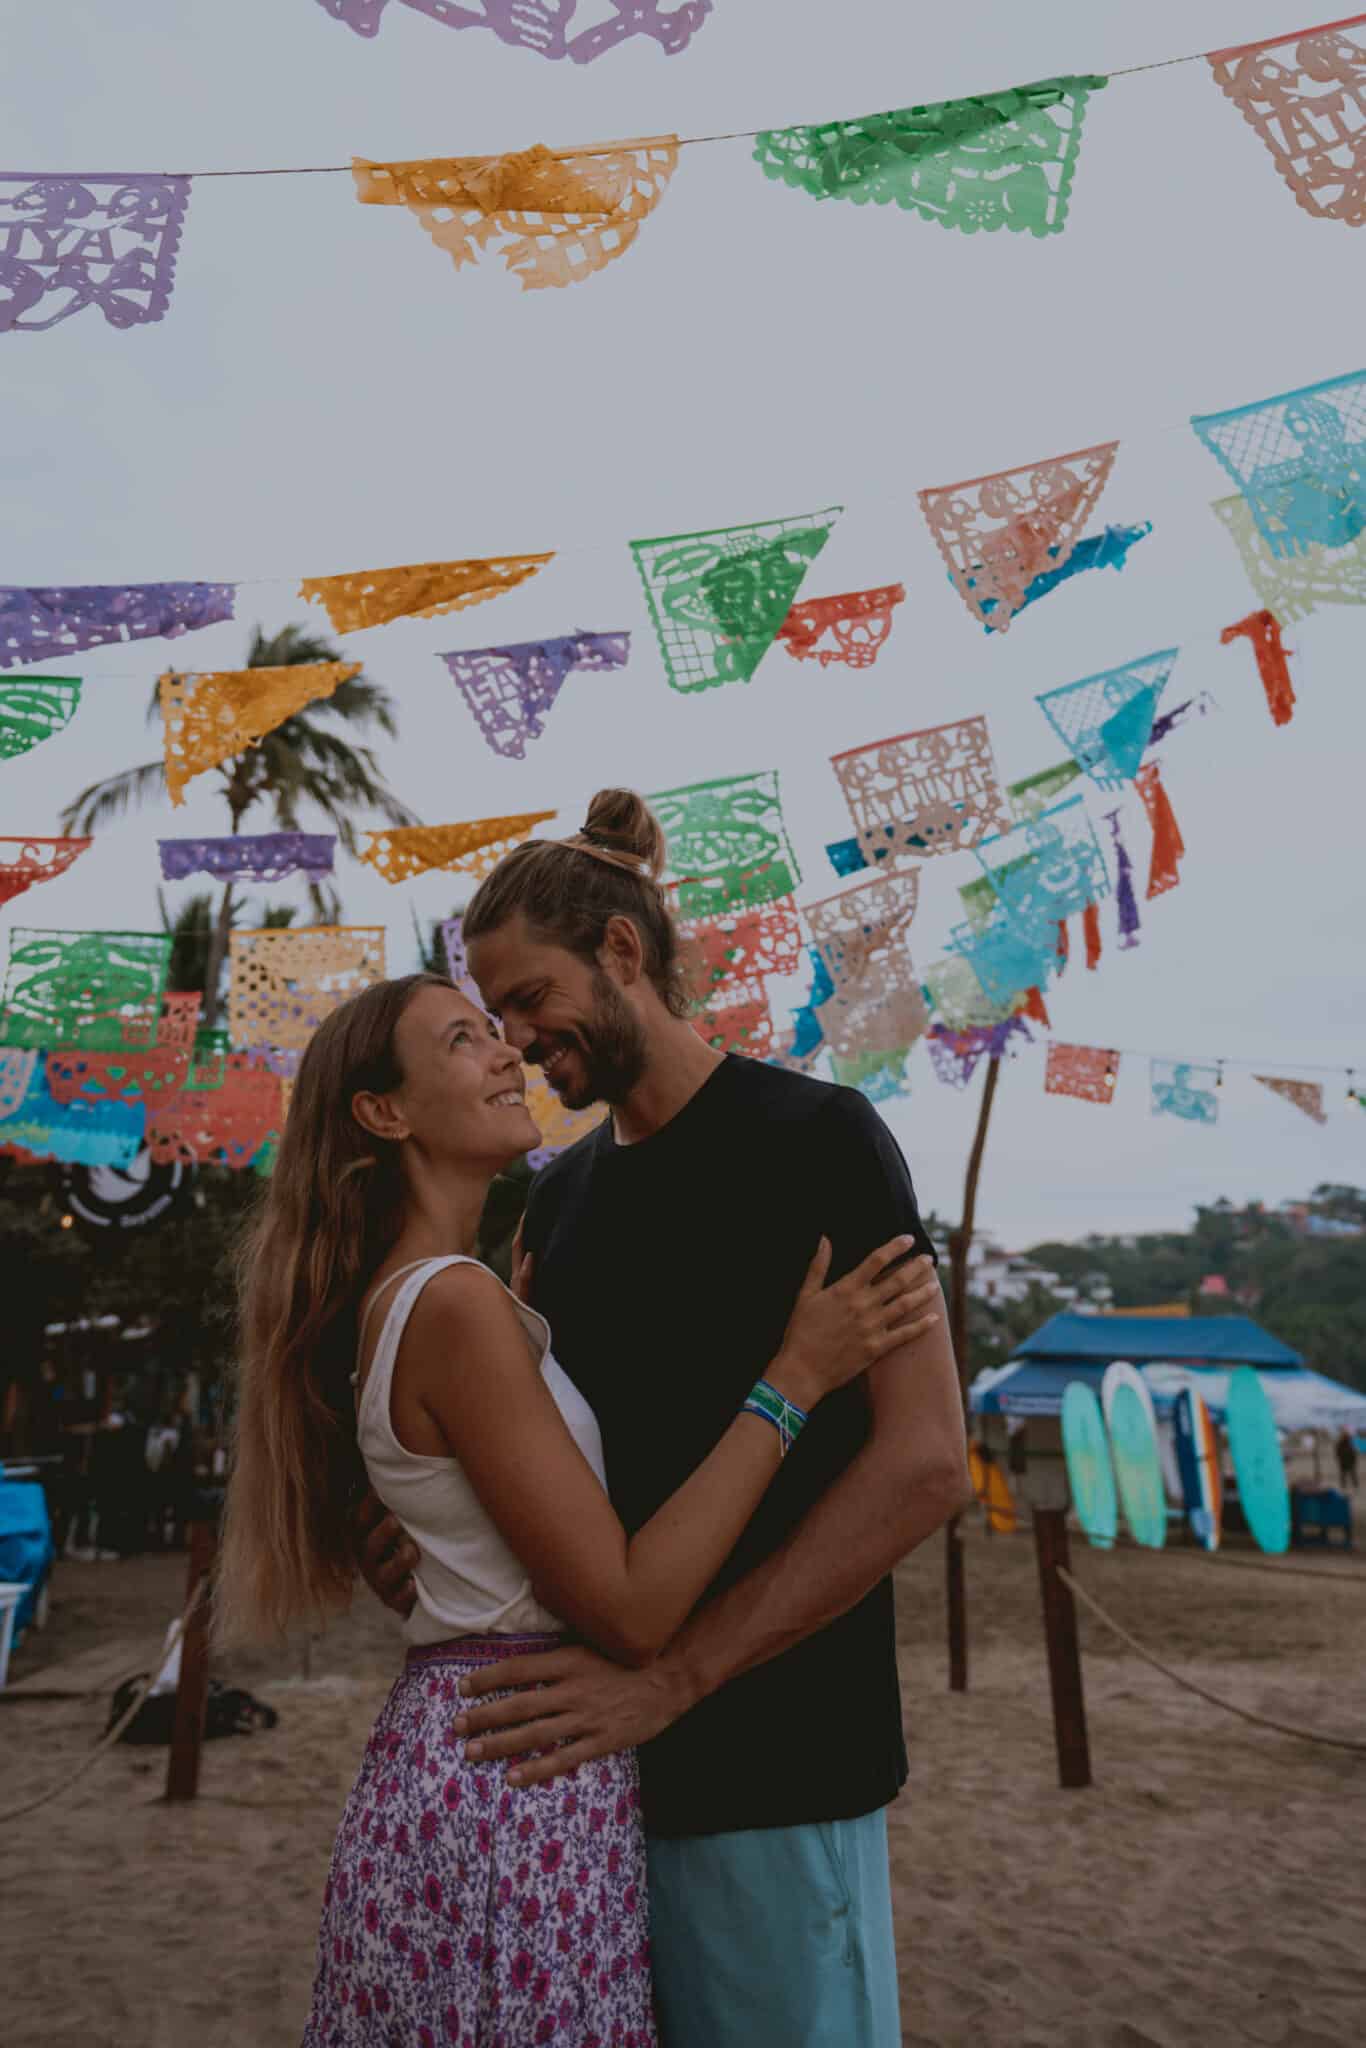 A couple embracing under colorful flags on the Sayulita beach.